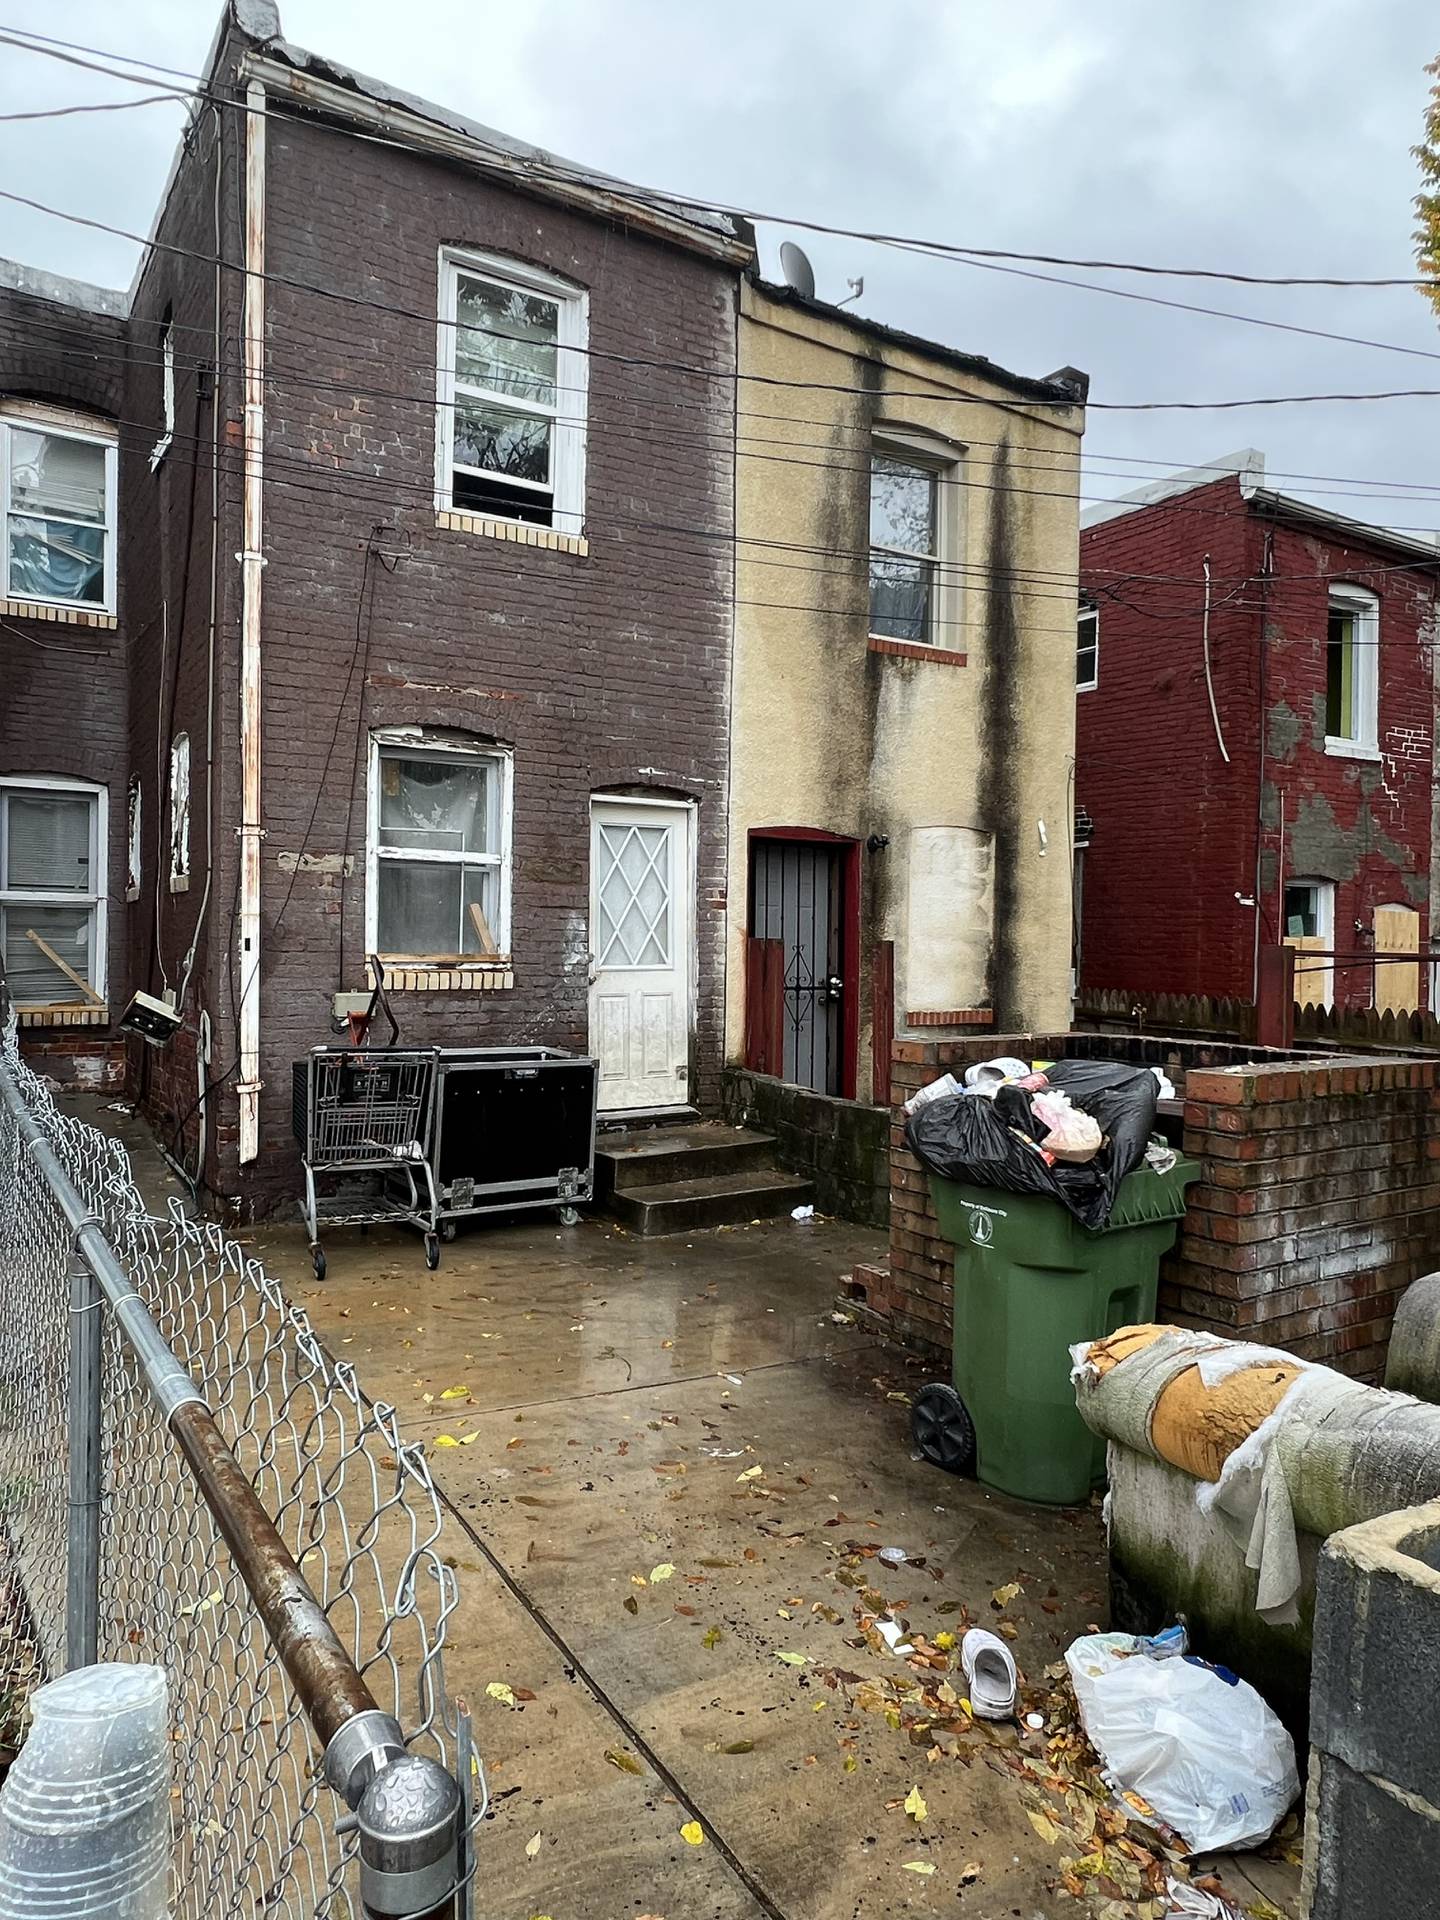 An East Baltimore home owned by an ABC Capital investor. The owners say they visited the property and found squatters living inside.